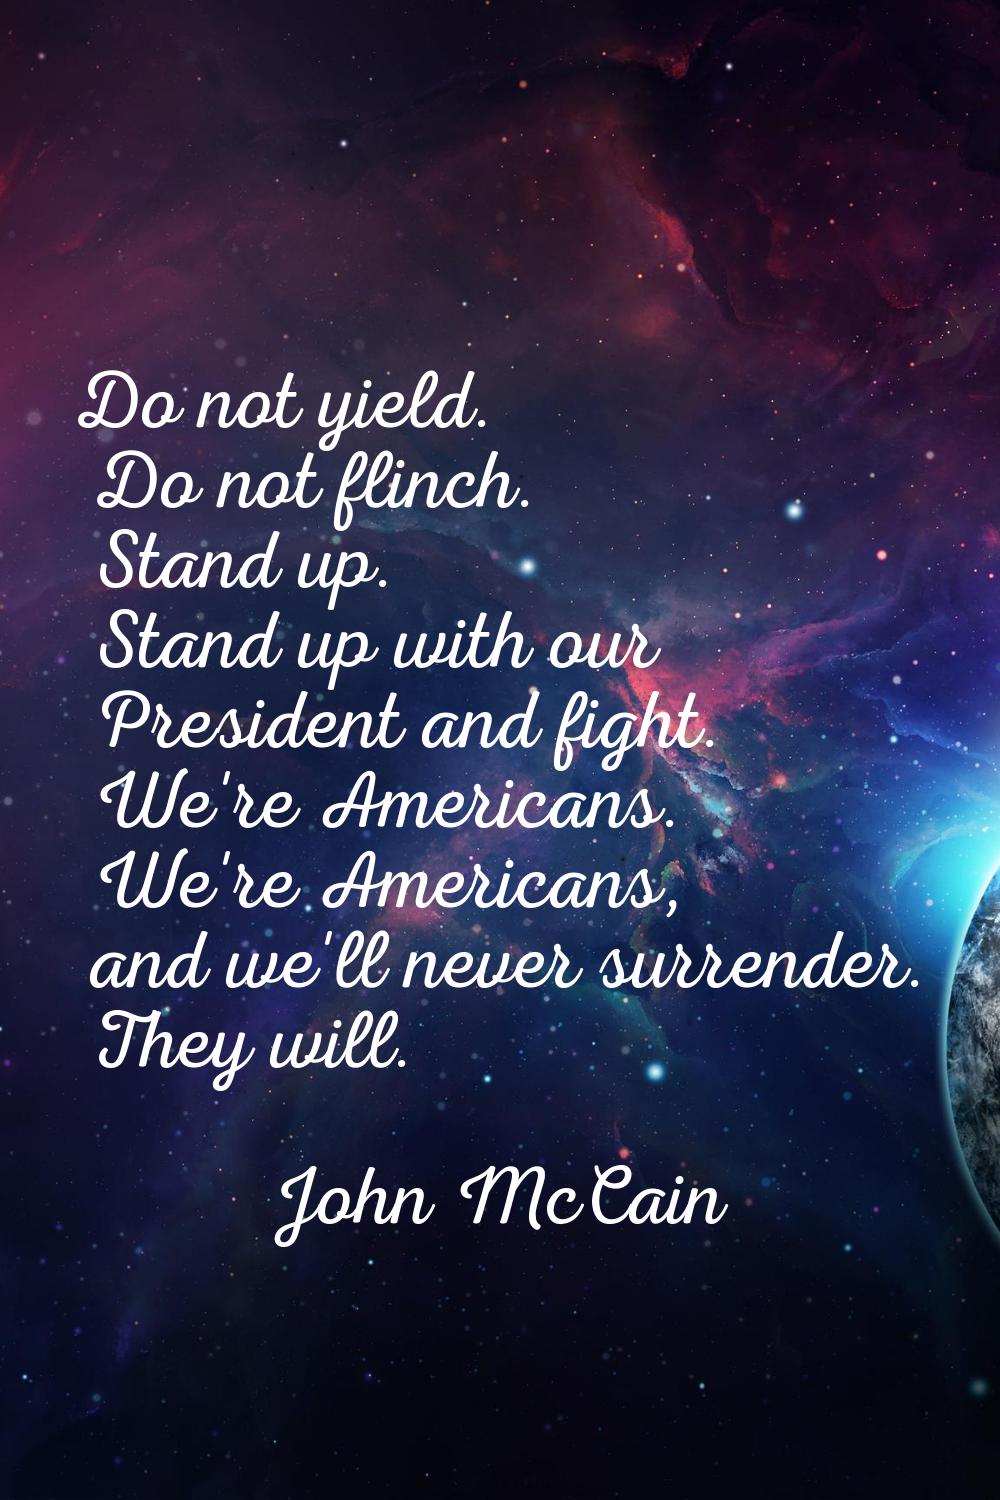 Do not yield. Do not flinch. Stand up. Stand up with our President and fight. We're Americans. We'r